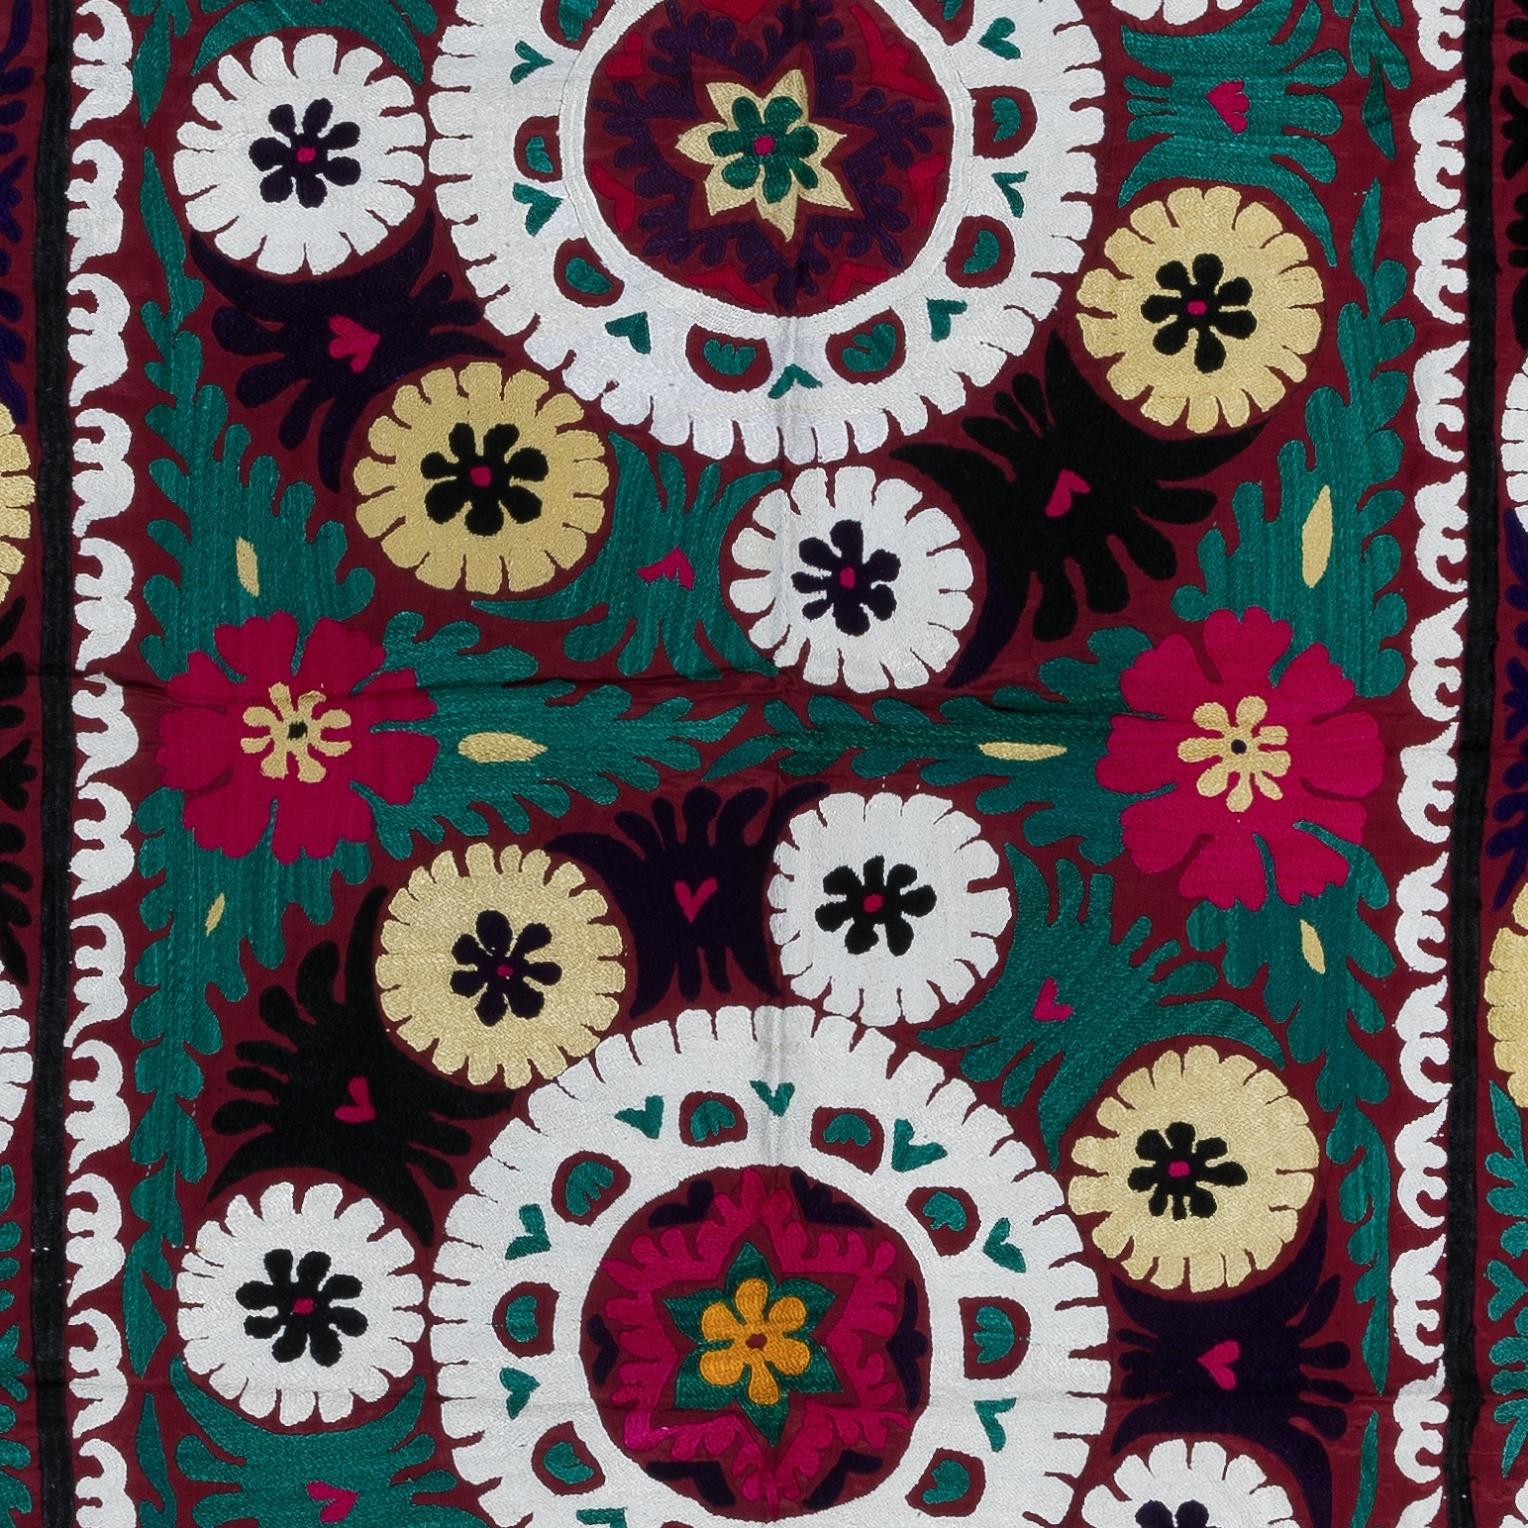 20th Century 4.7x6.7 ft Suzani Textile Silk Embroidery Wall Hanging, Colorful Uzbek Bedspread For Sale